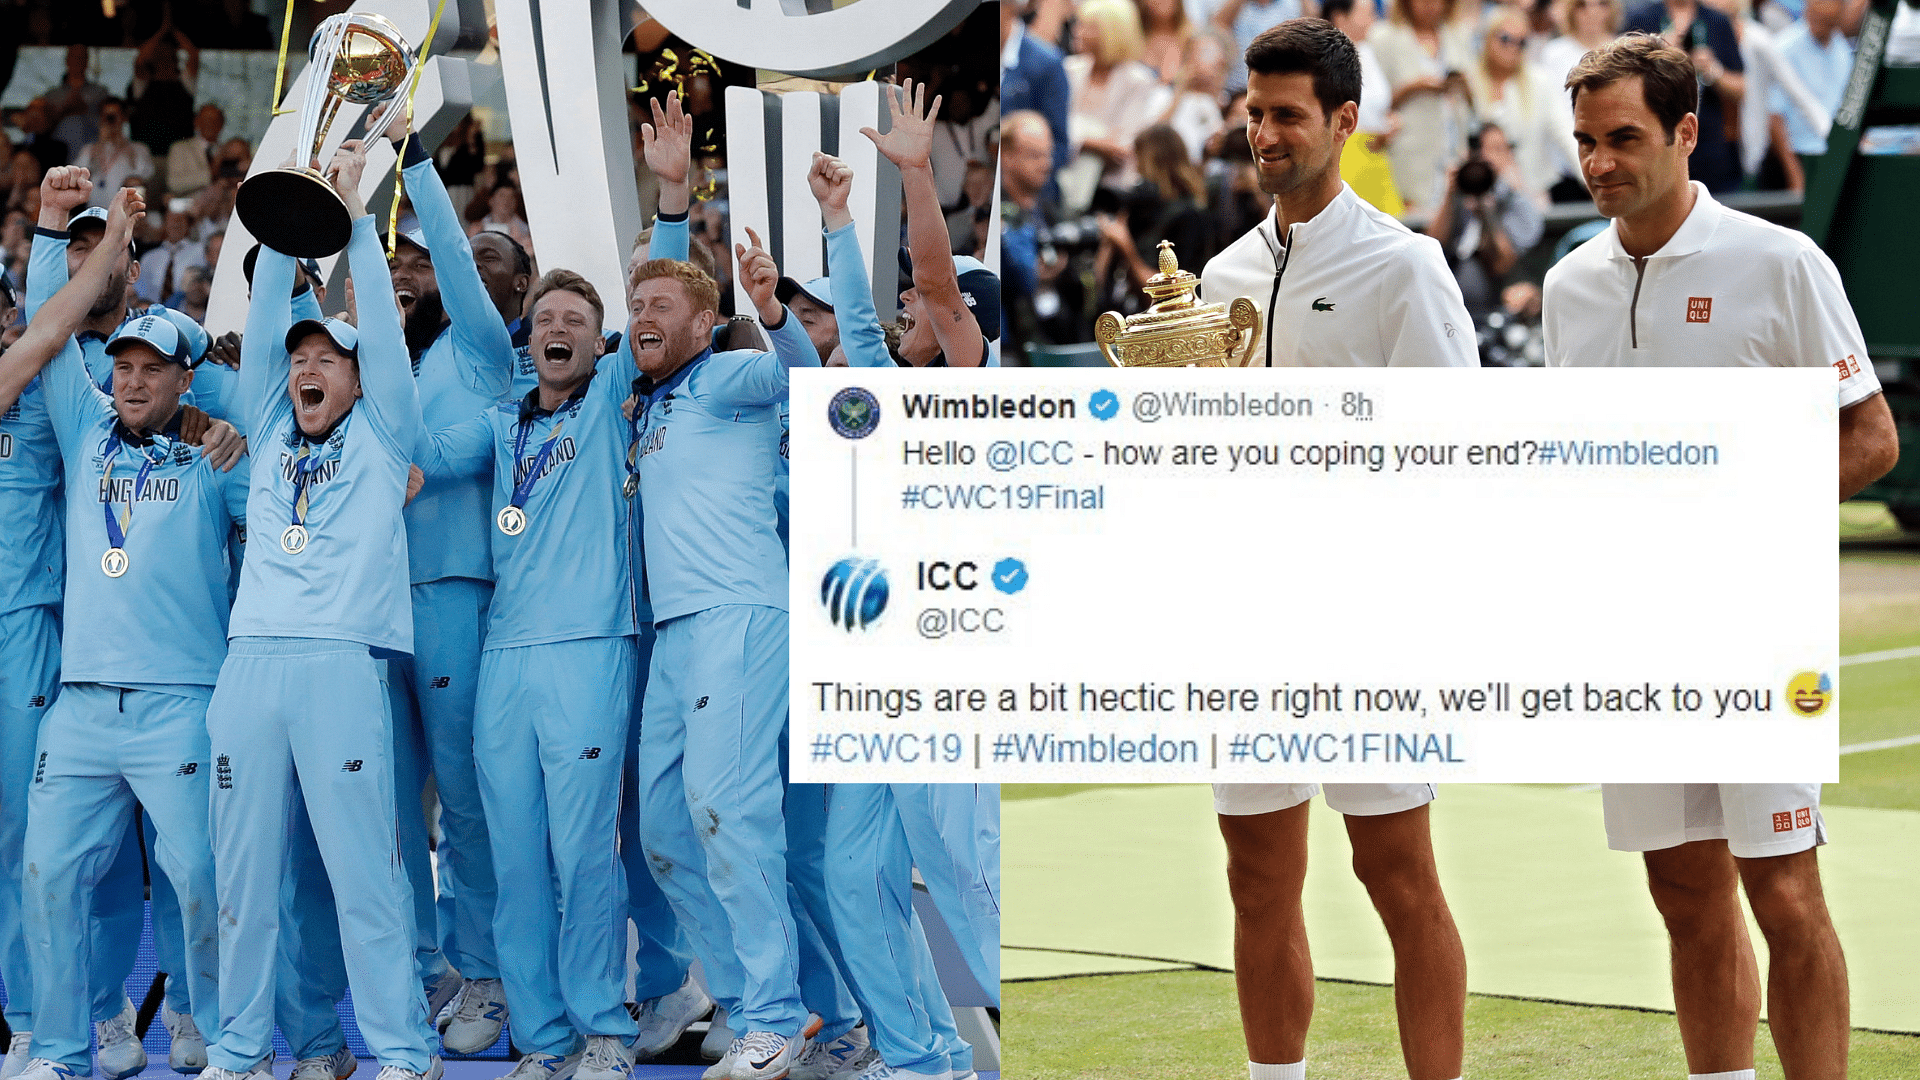 A Twitter conversation between Wimbledon and ICC’s Twitter accounts captured netizens’ stress while watching the two finals.